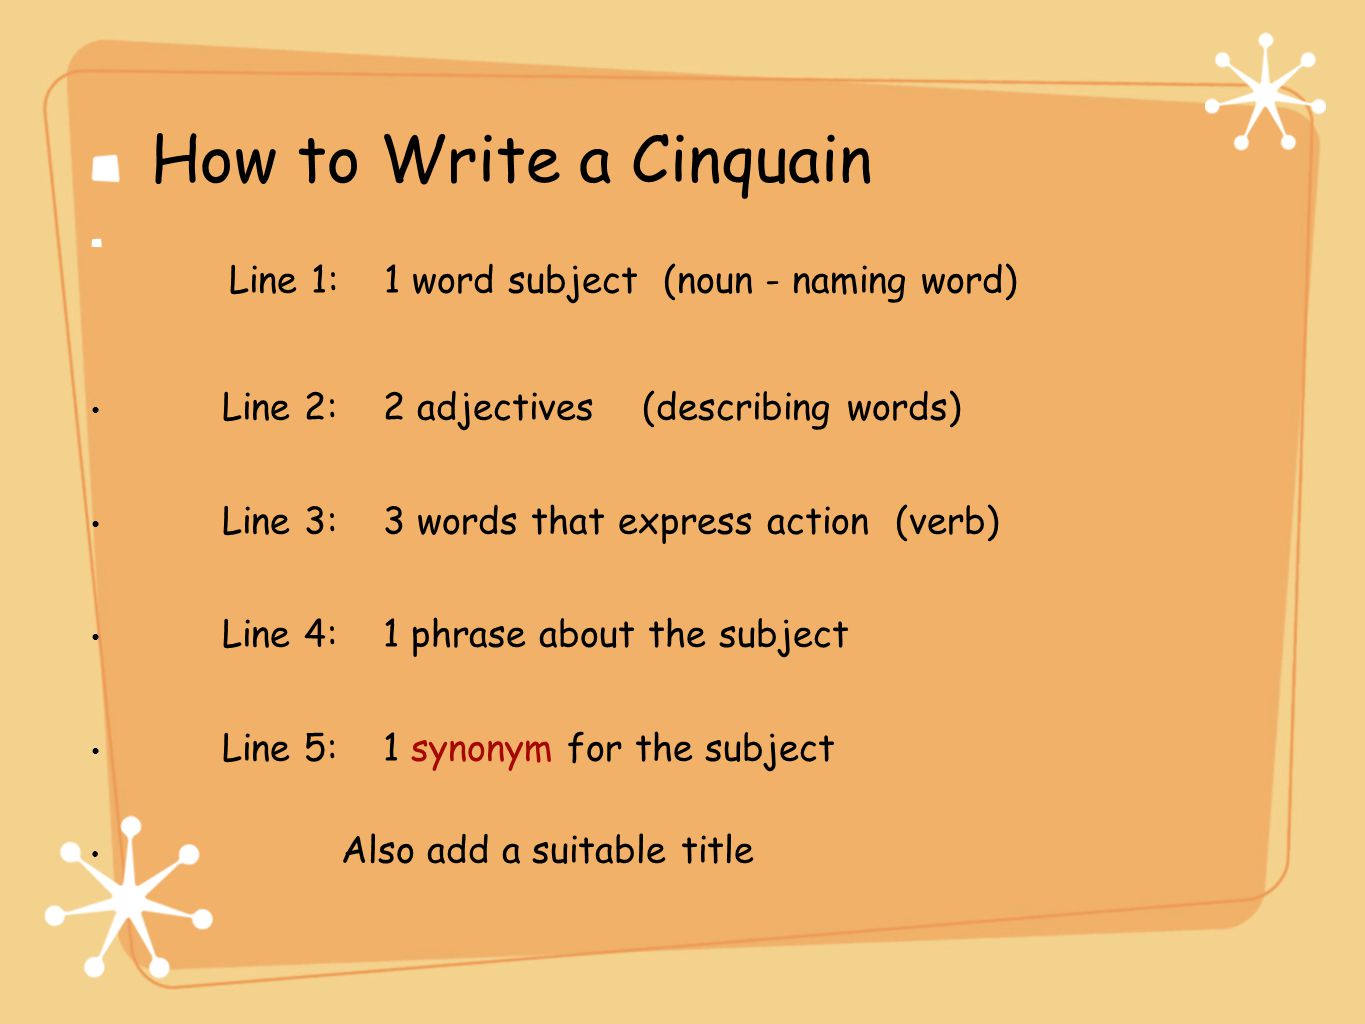 How to write a-one liner